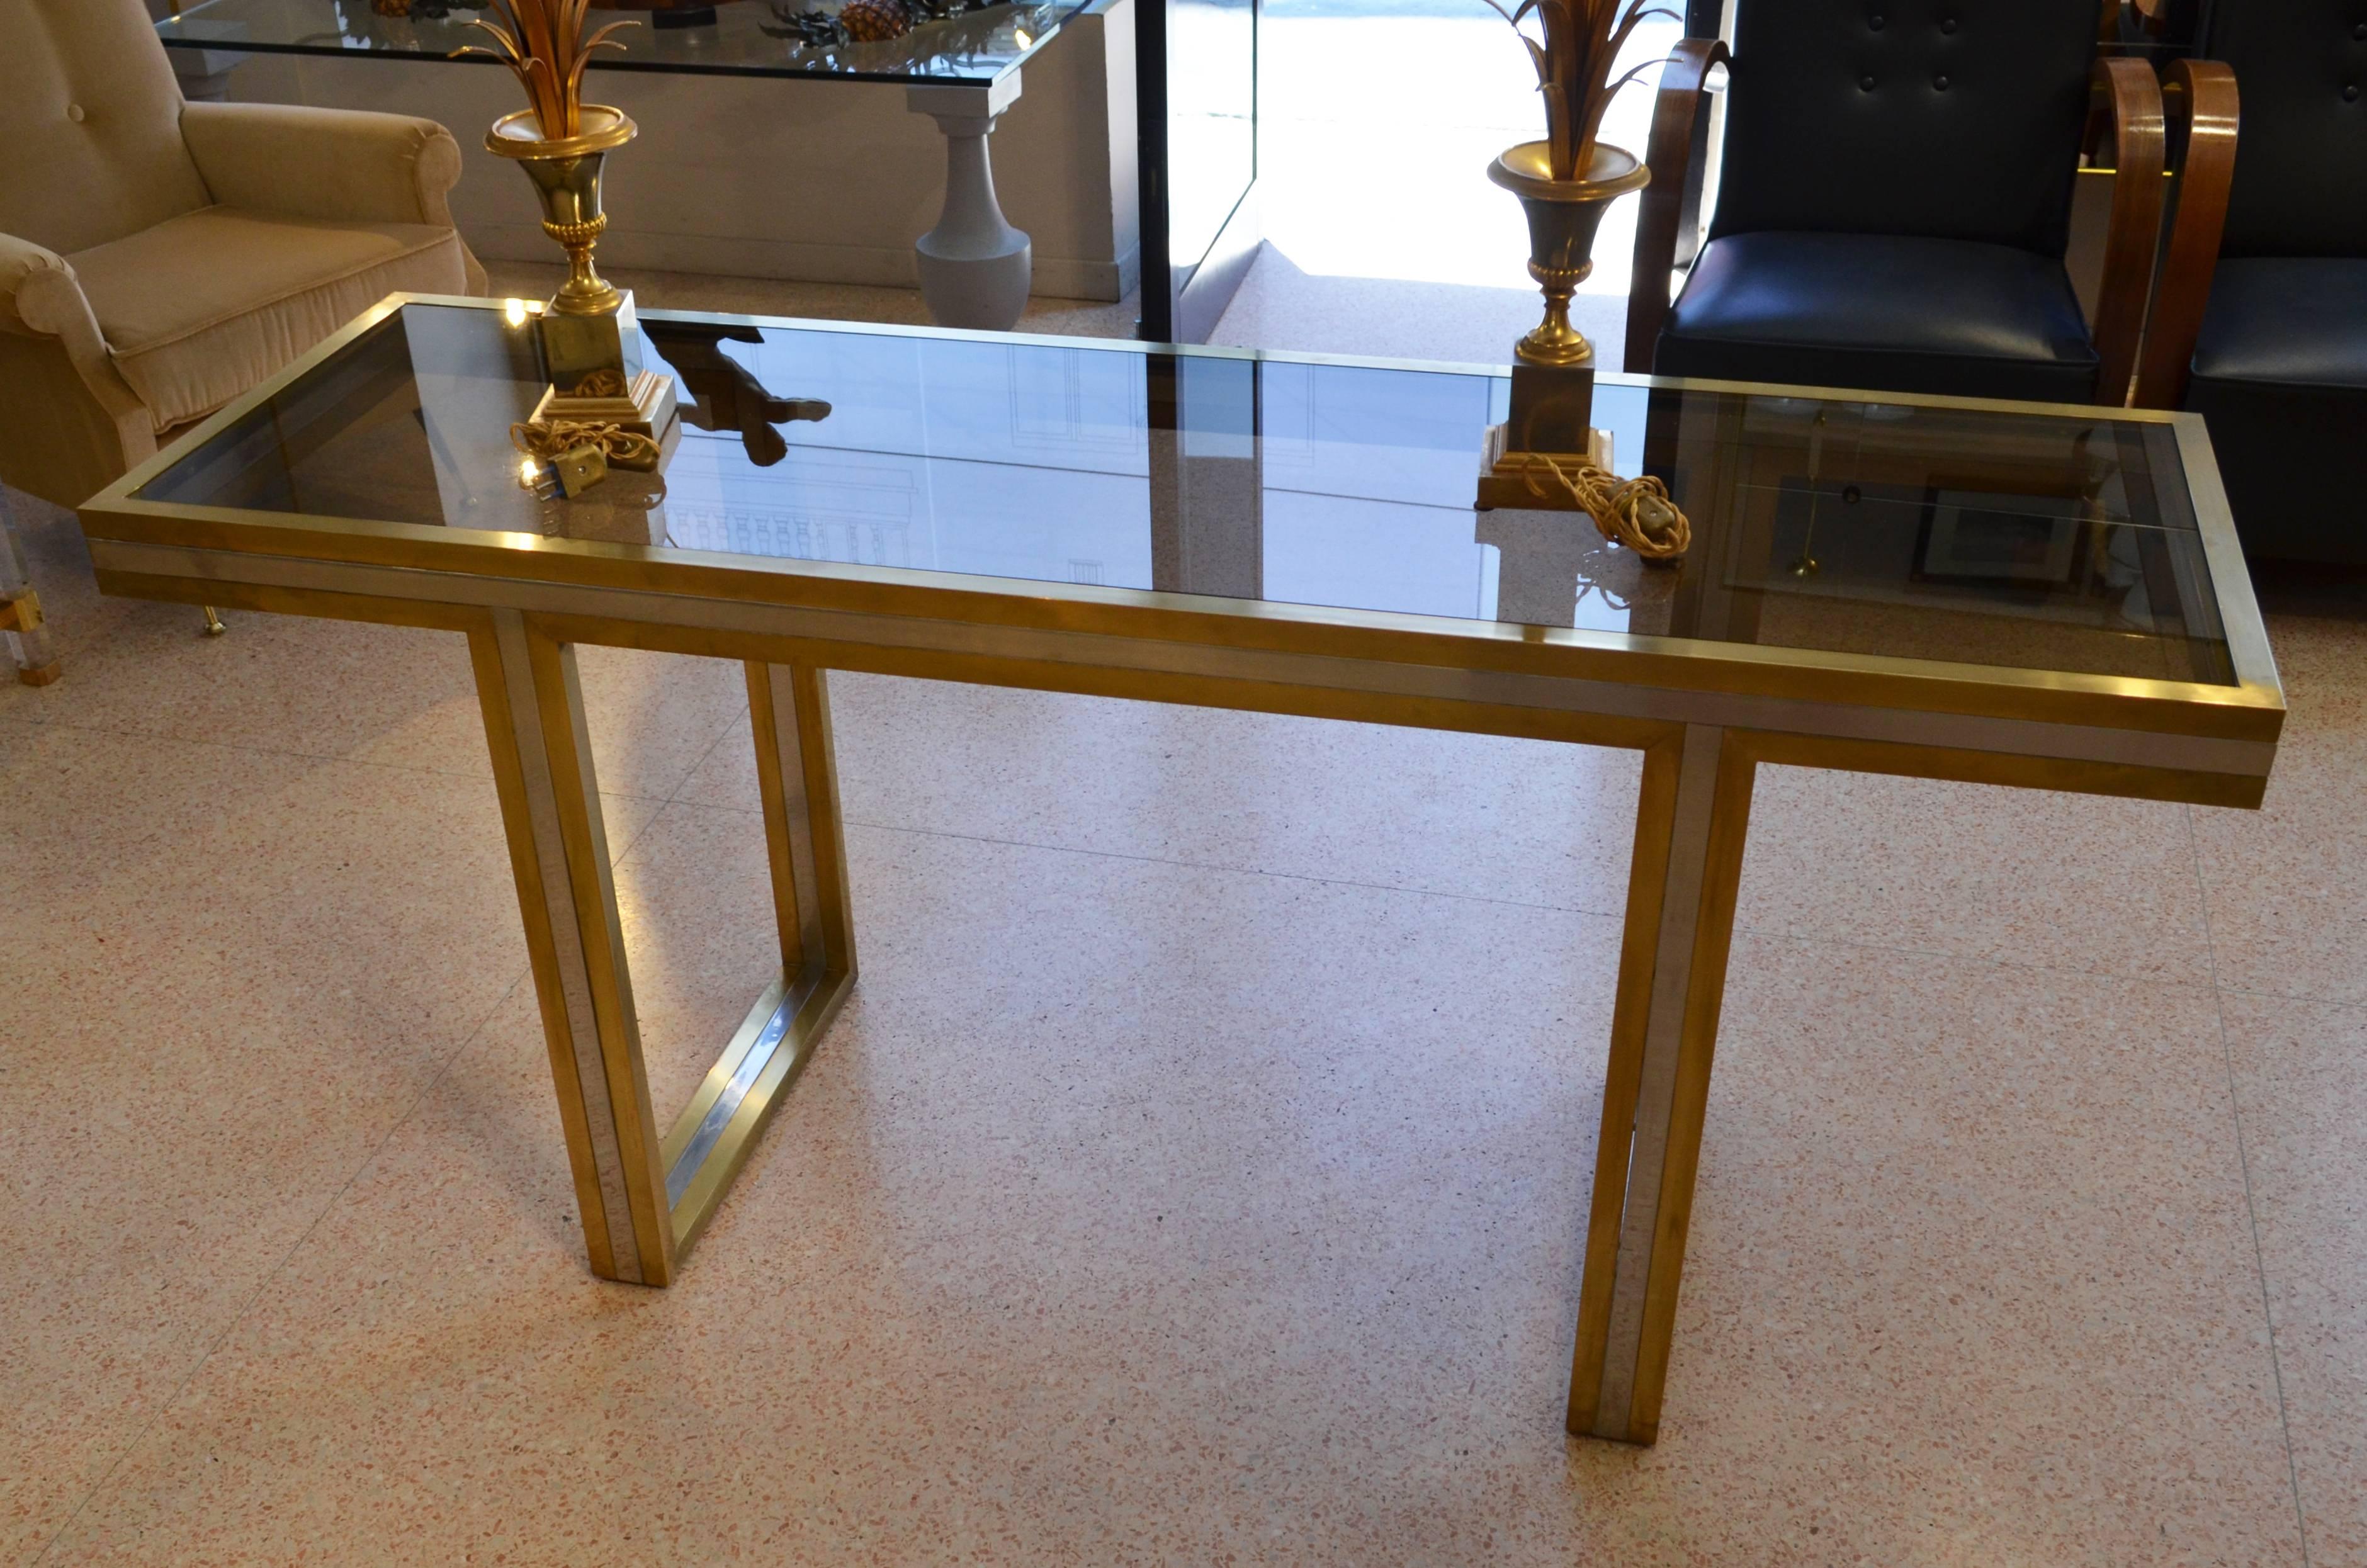 1970s Brass and Steel Smoked Glass Top Table Console at Rega manner 1